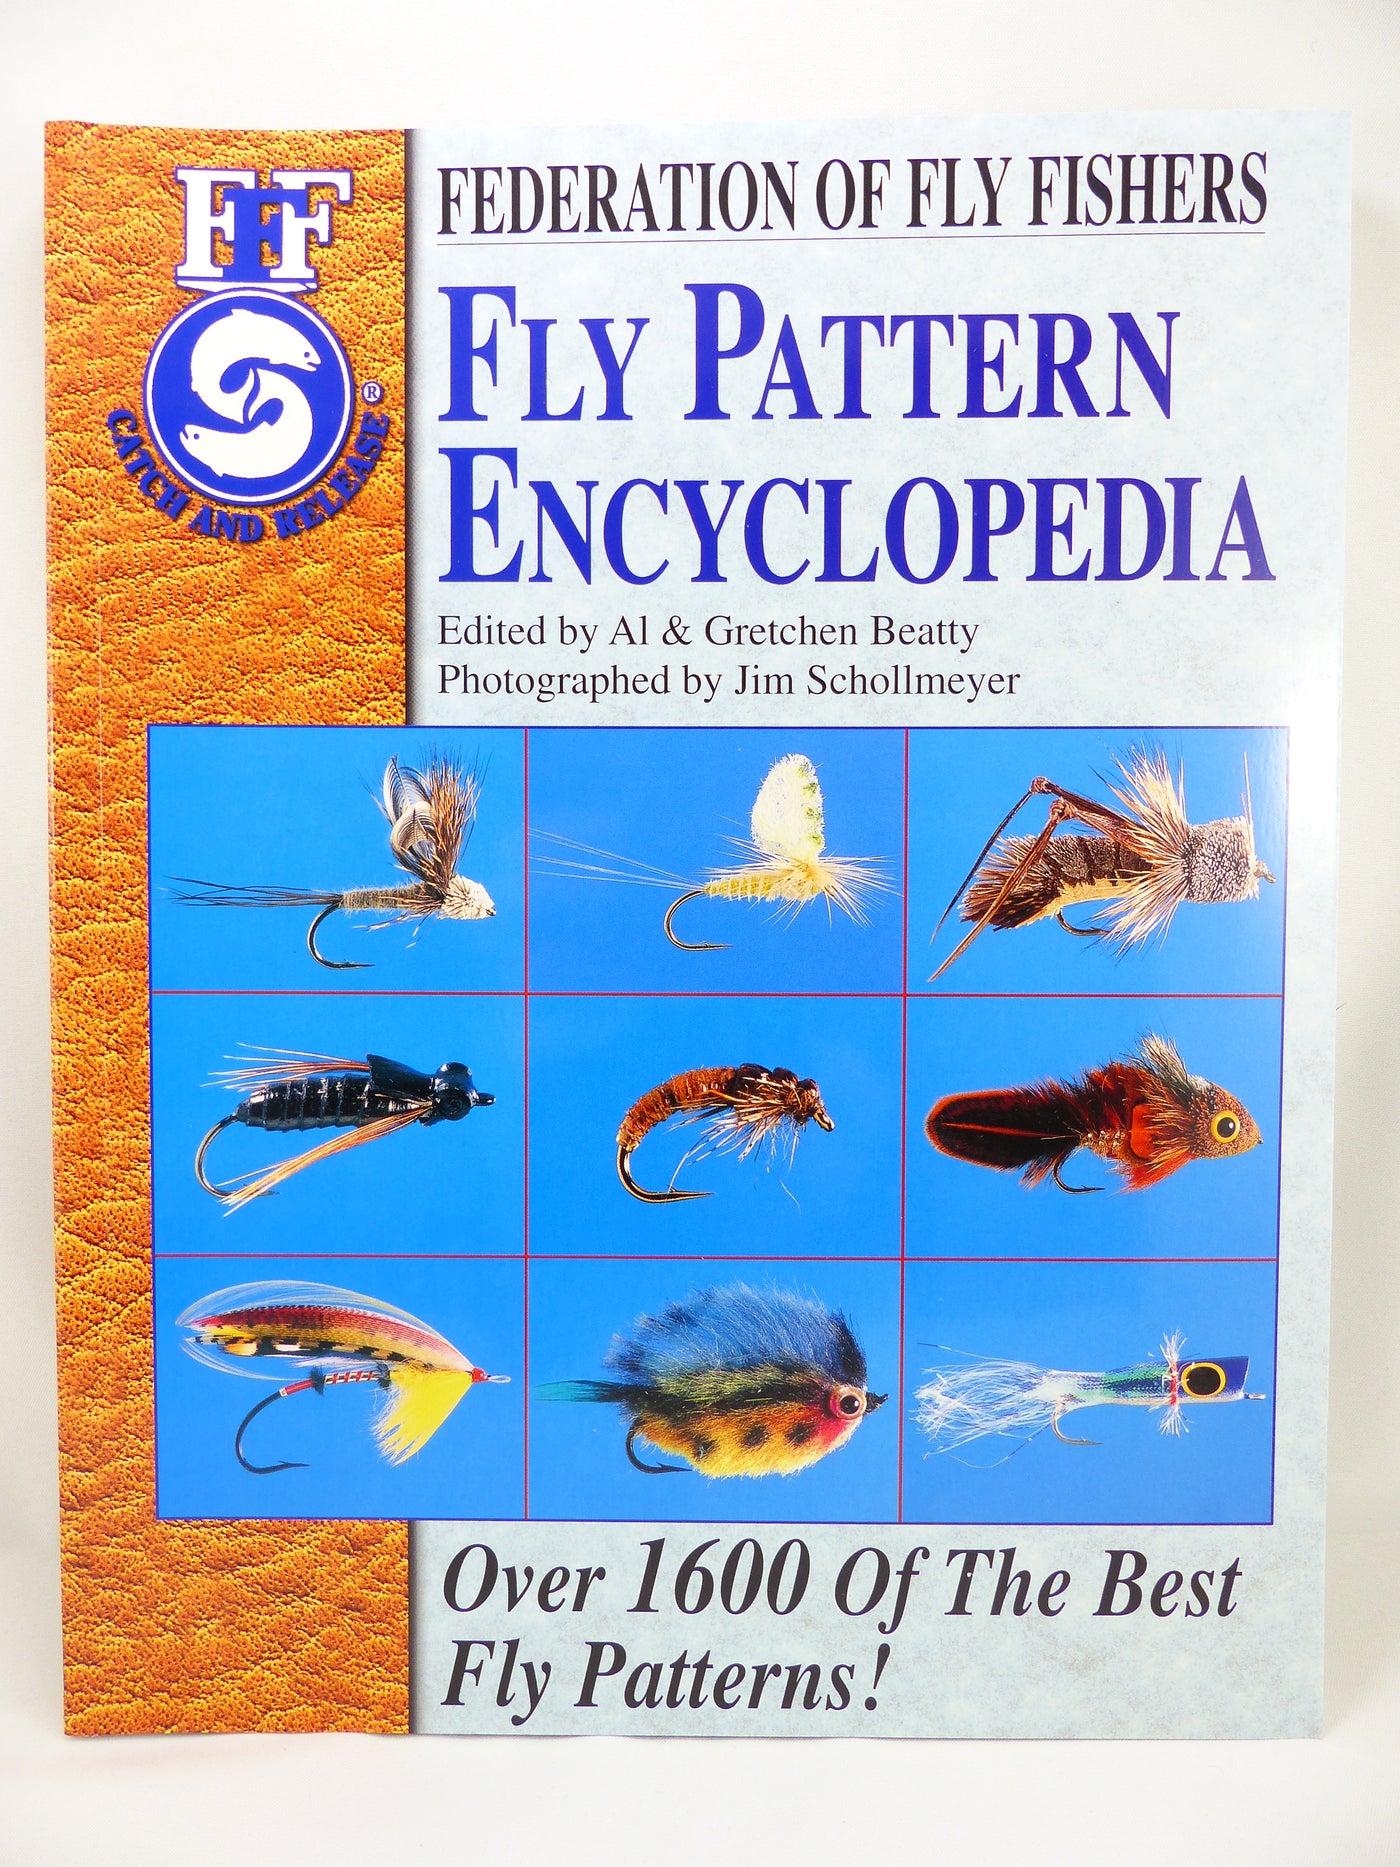 FEDERATION OF FLY FISHERS BEST 1600 FLIES